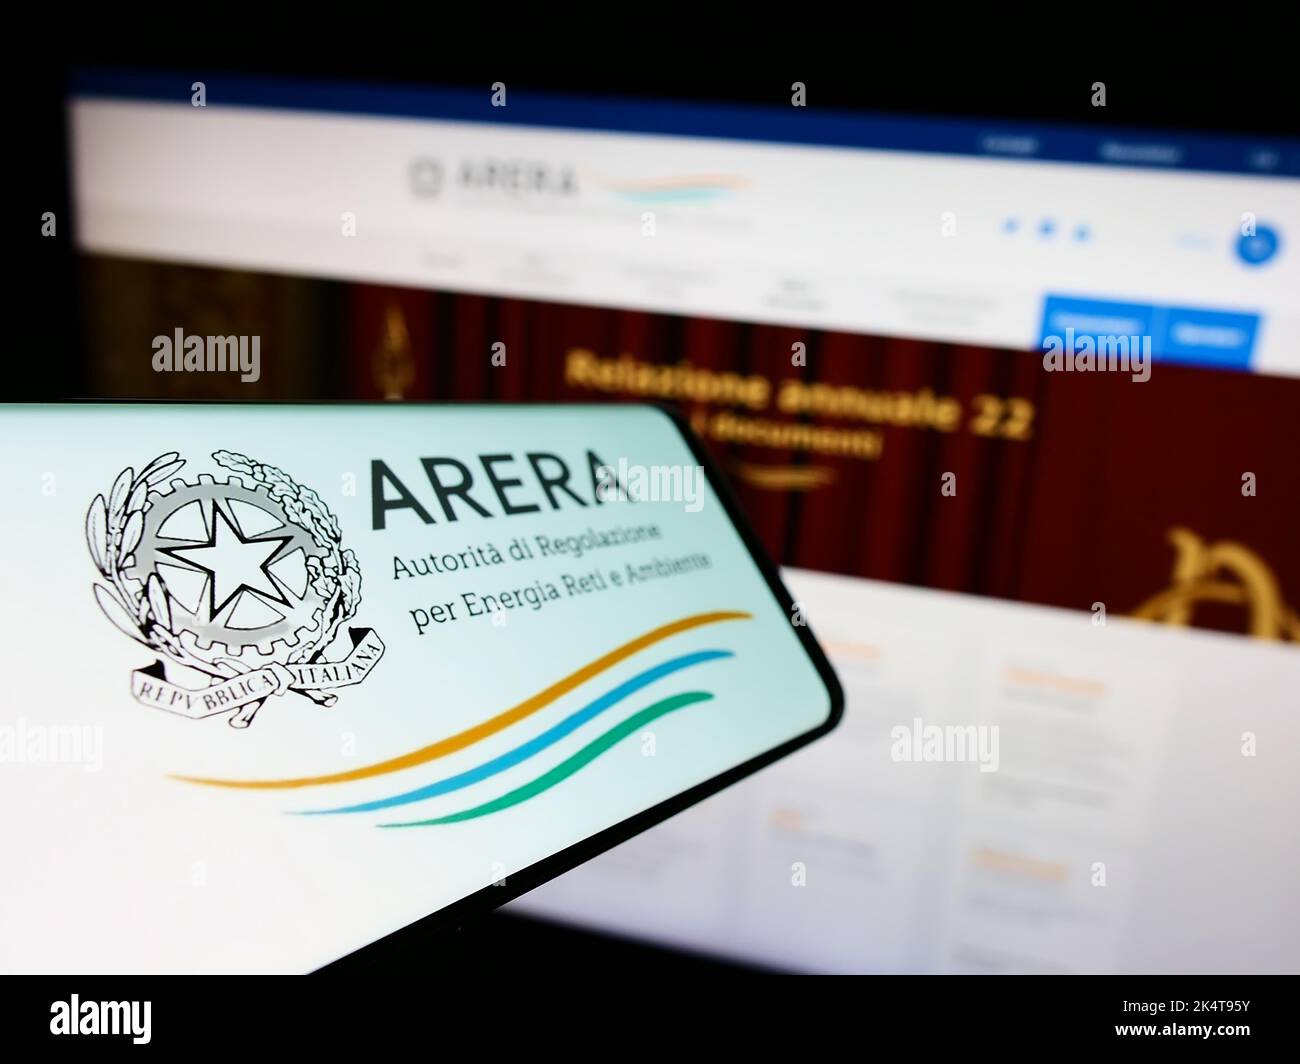 Mobile phone with logo of Italian regulation authority ARERA on screen in front of website. Focus on phone left of display. Stock Photo